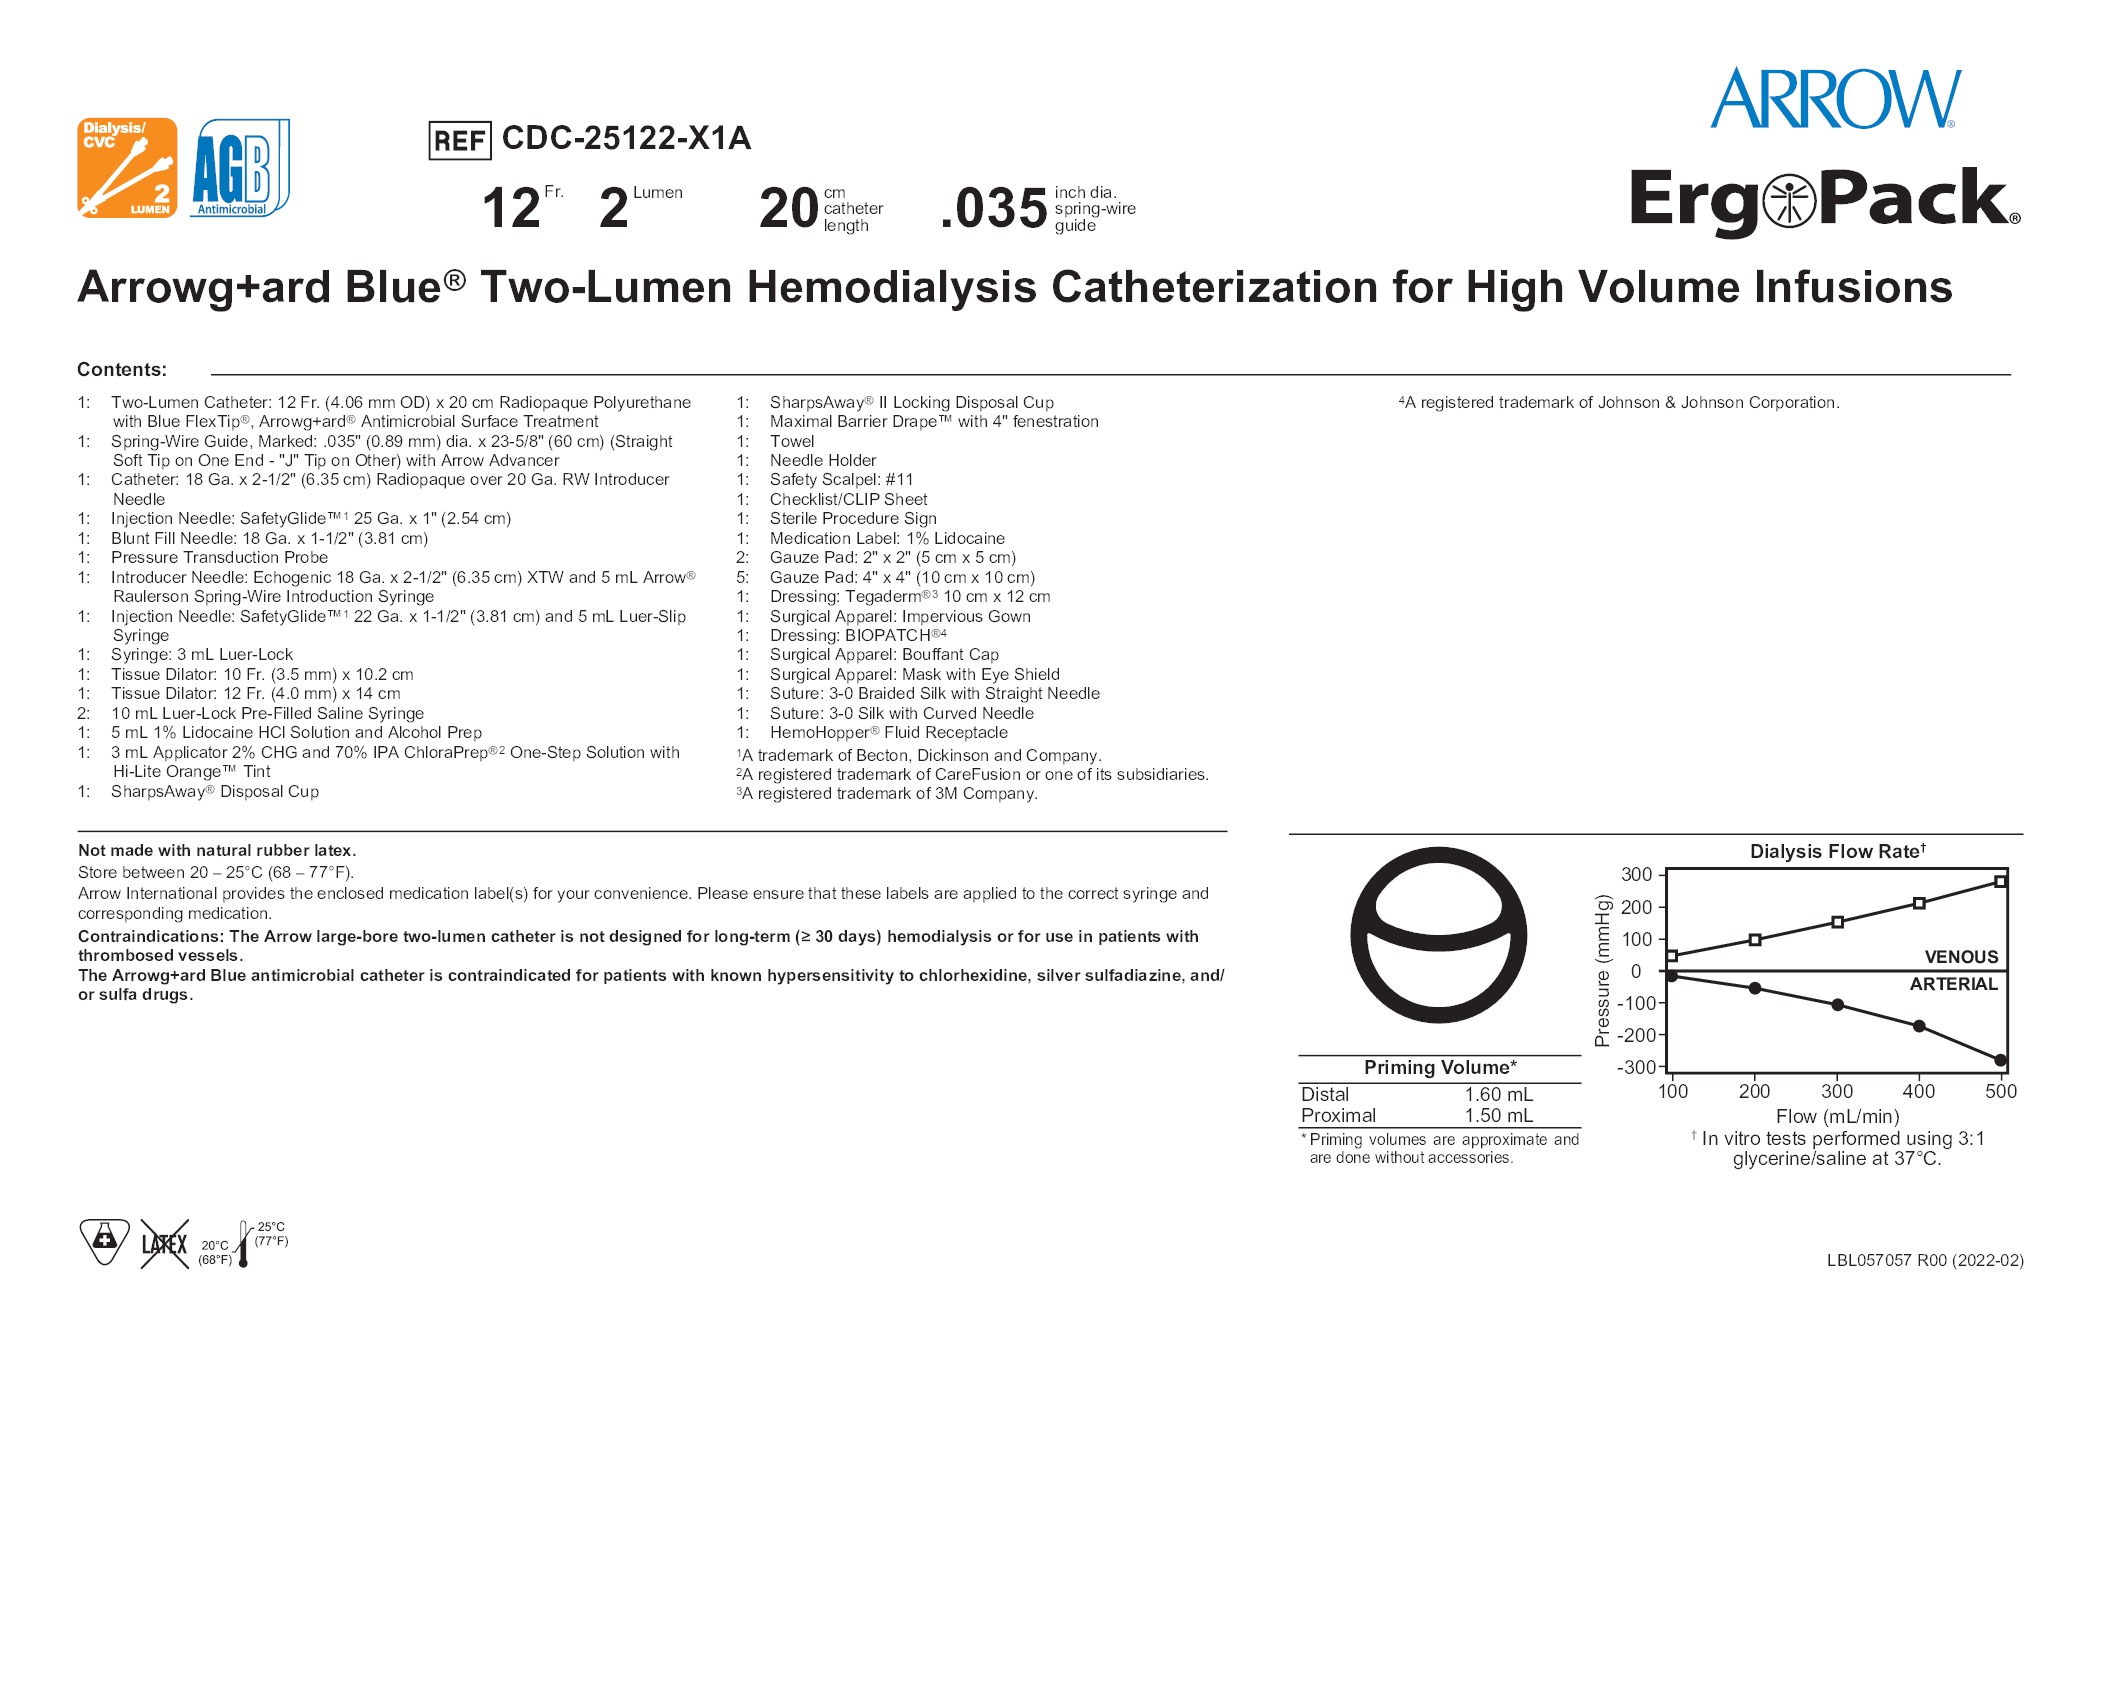 CDC-25122-X1A - Teleflex Incorporated - Vascular Access Product 